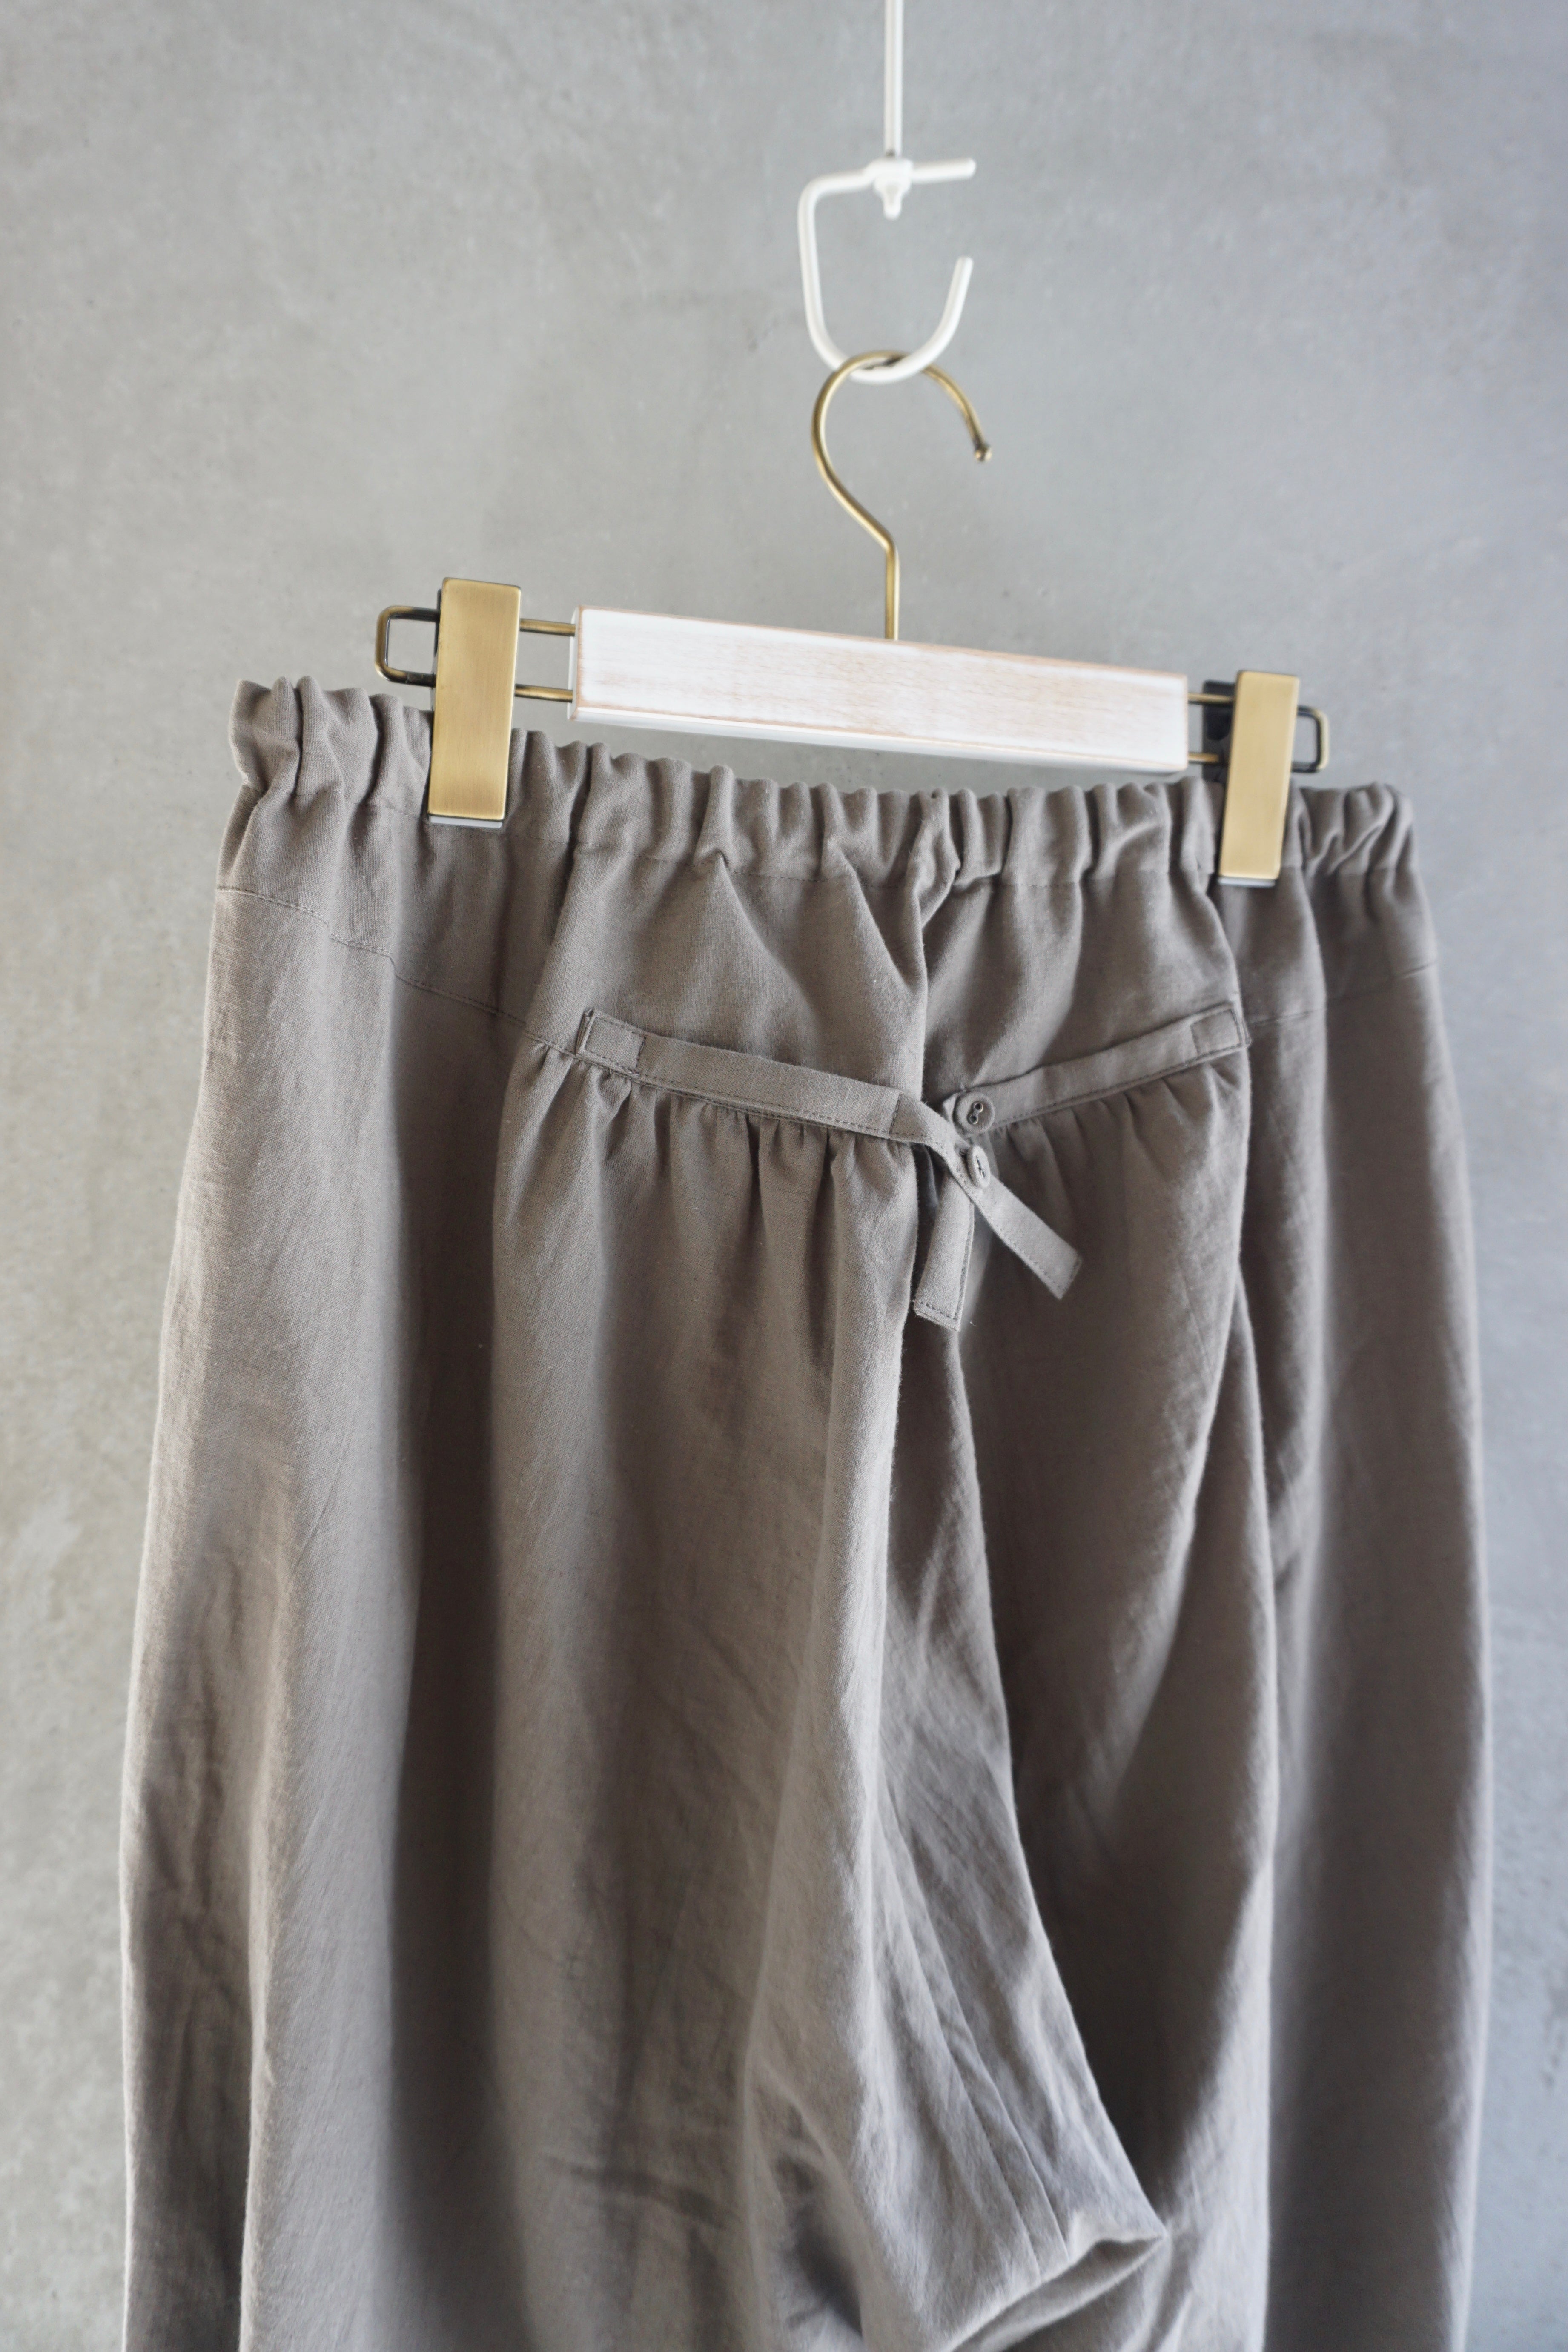 Vlas Blomme / Washed 60/1 Line レギンスパンツ